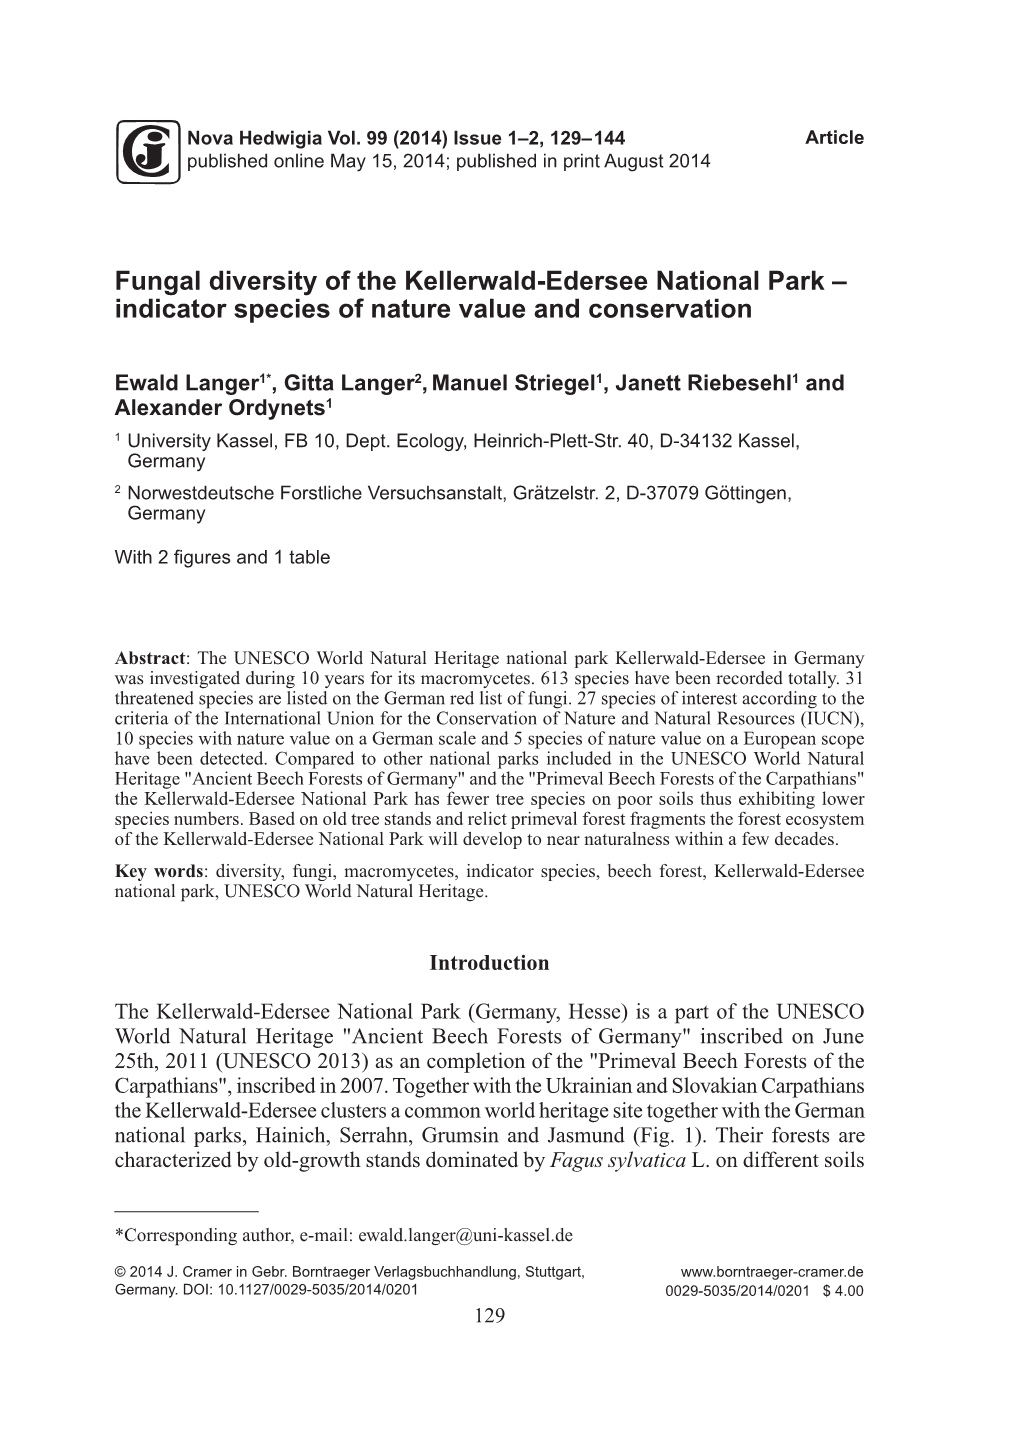 Fungal Diversity of the Kellerwald-Edersee National Park – Indicator Species of Nature Value and Conservation